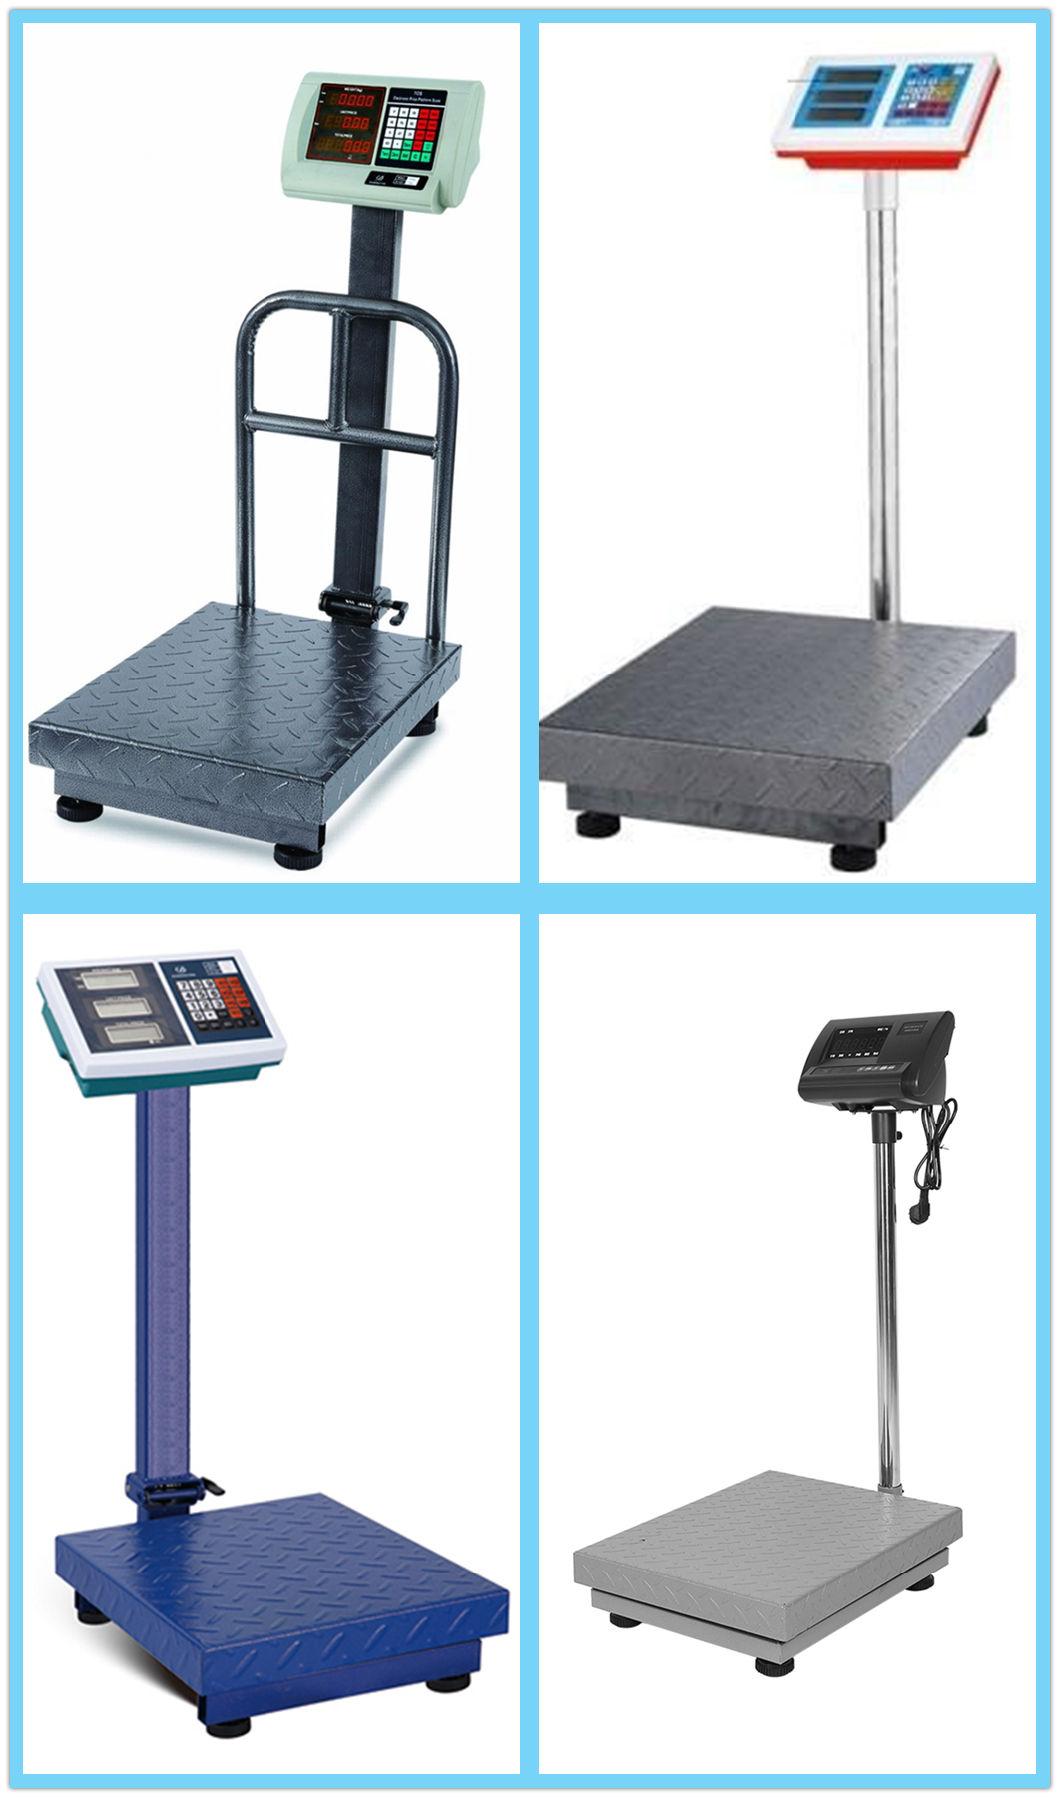 Digital Electronic Weight Stainless Steel Price Indicator Carbon Steel Frame Weighing Floor Bench Scale Platform Scale